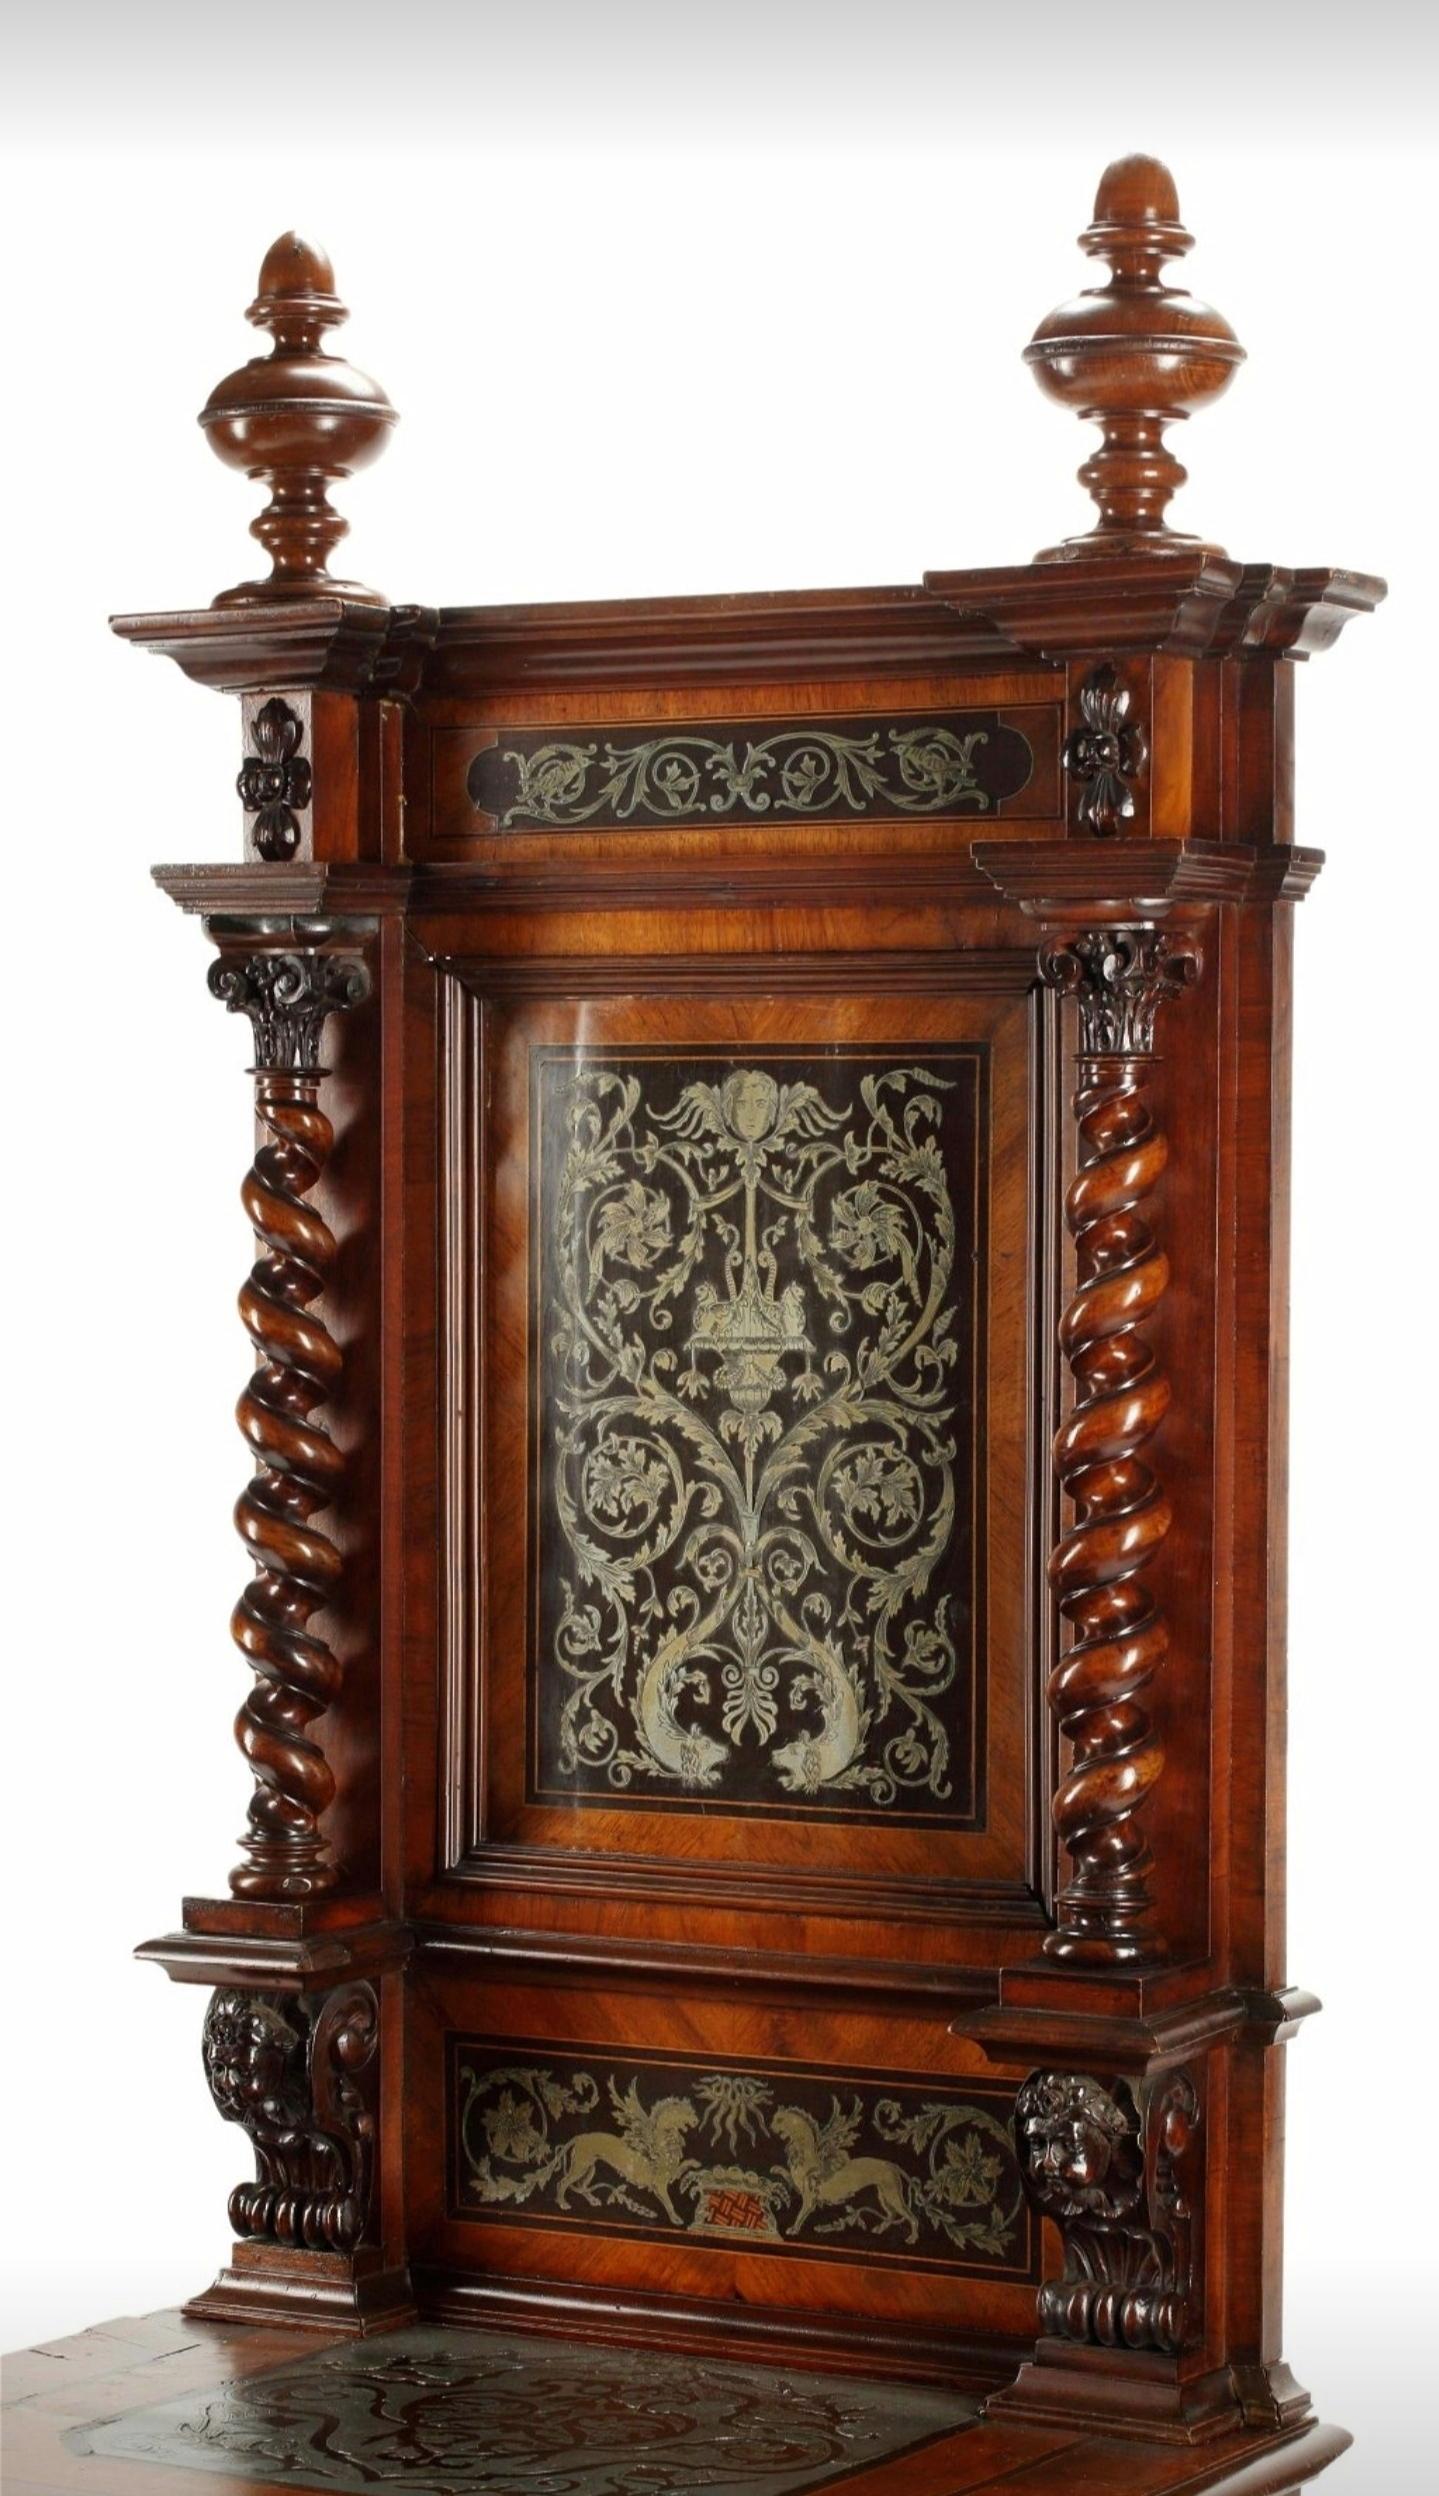 A magnificent fine quality antique European pewter-inlaid cabinet. 

Exquisitely hand-crafted in Continental Europe in the 19th century, most likely Northern Italy, exceptionally executed in refined Renaissance Revival taste, finely carved and